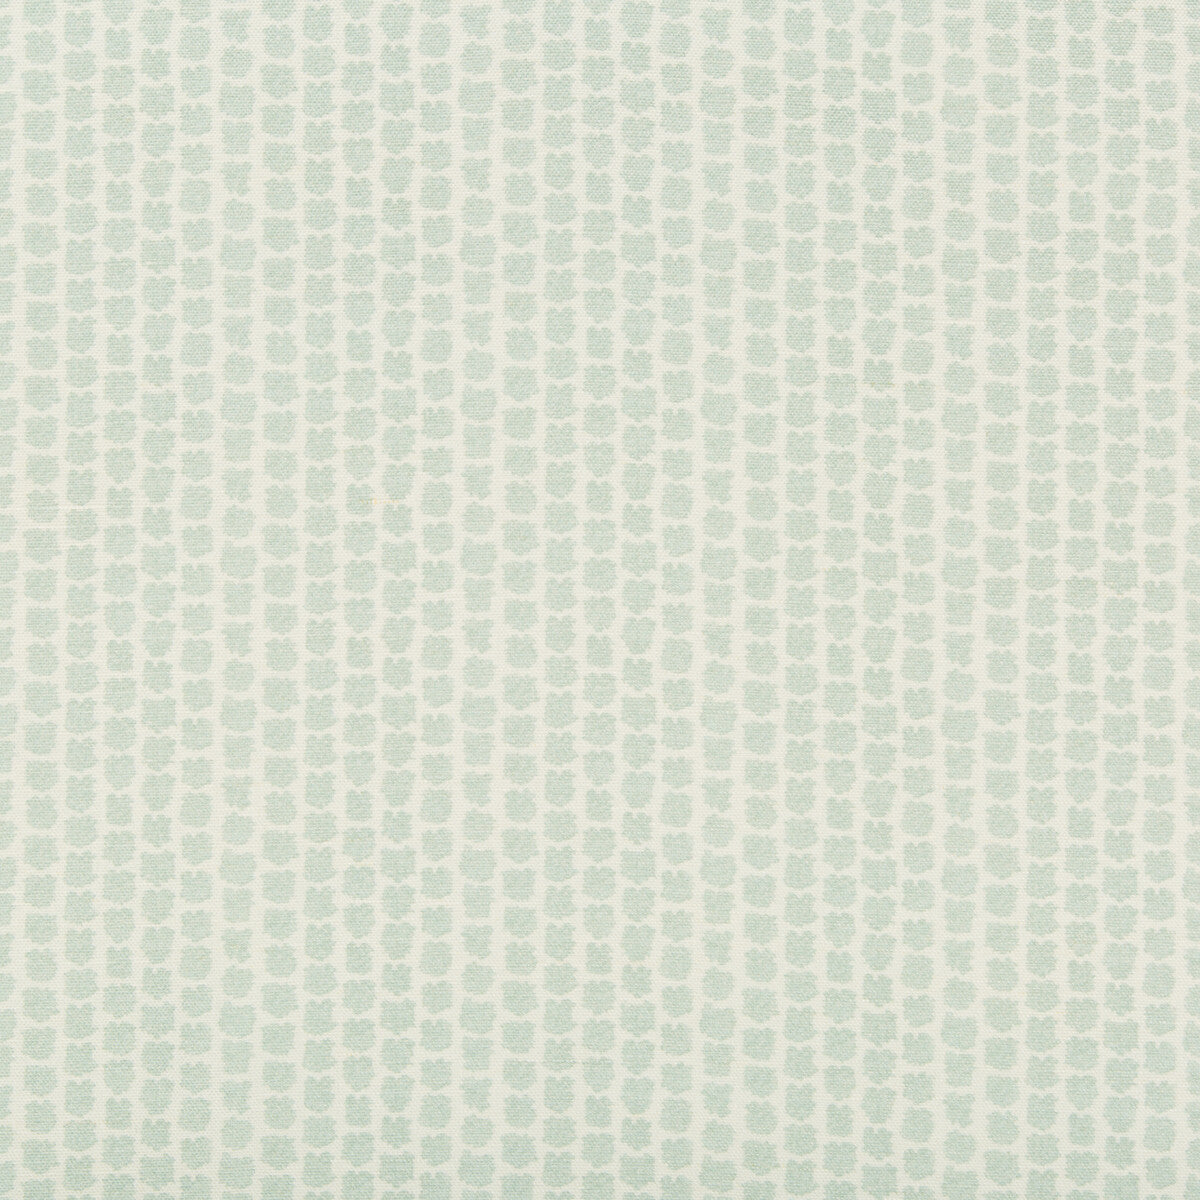 Kaya II fabric in mist color - pattern 2017224.123.0 - by Lee Jofa in the Westport collection